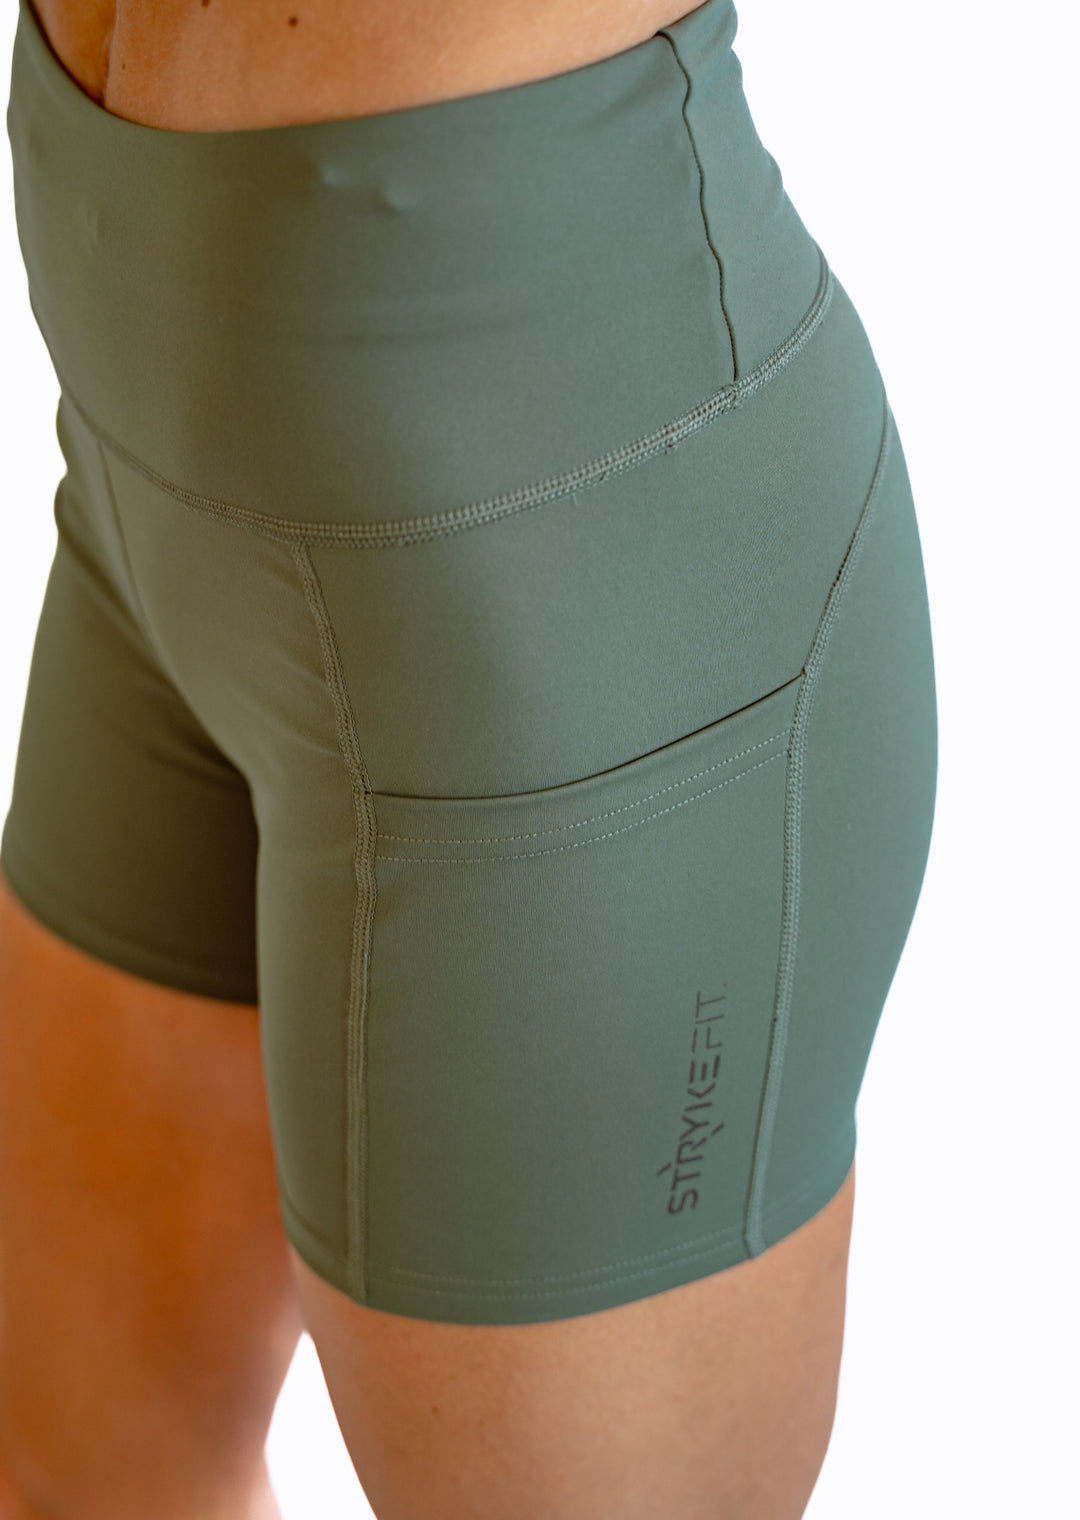 The SURGE 4" RUN SHORT is the perfect staple piece, combining comfort, support, and lightweight fabric to deliver exceptional mobility. 